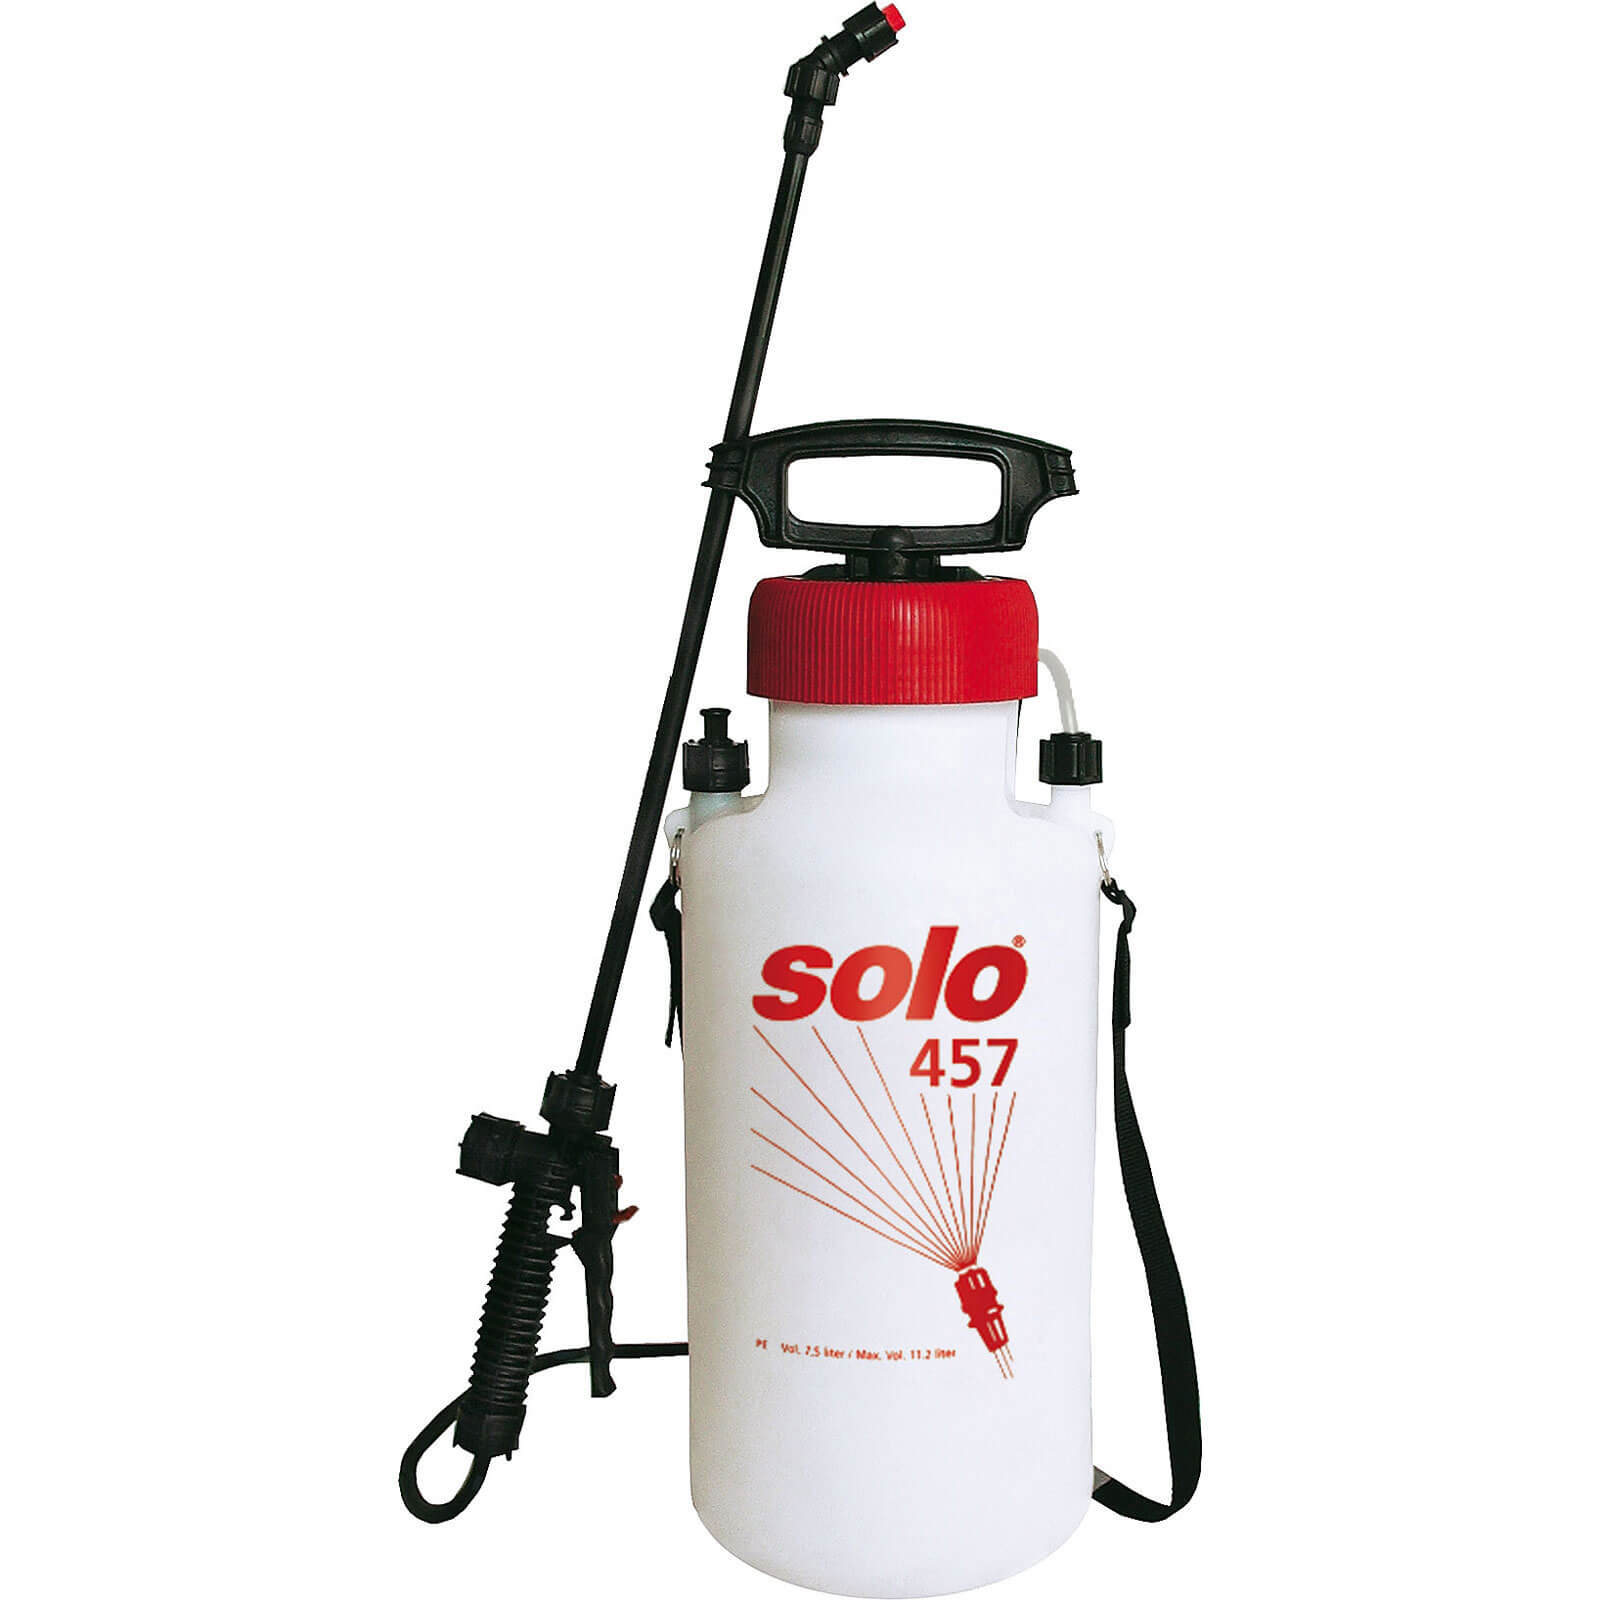 Solo 457 Chemical & Water Pressure Sprayer 9 Litres Holds 7 Litres with 500mm Spray Lance